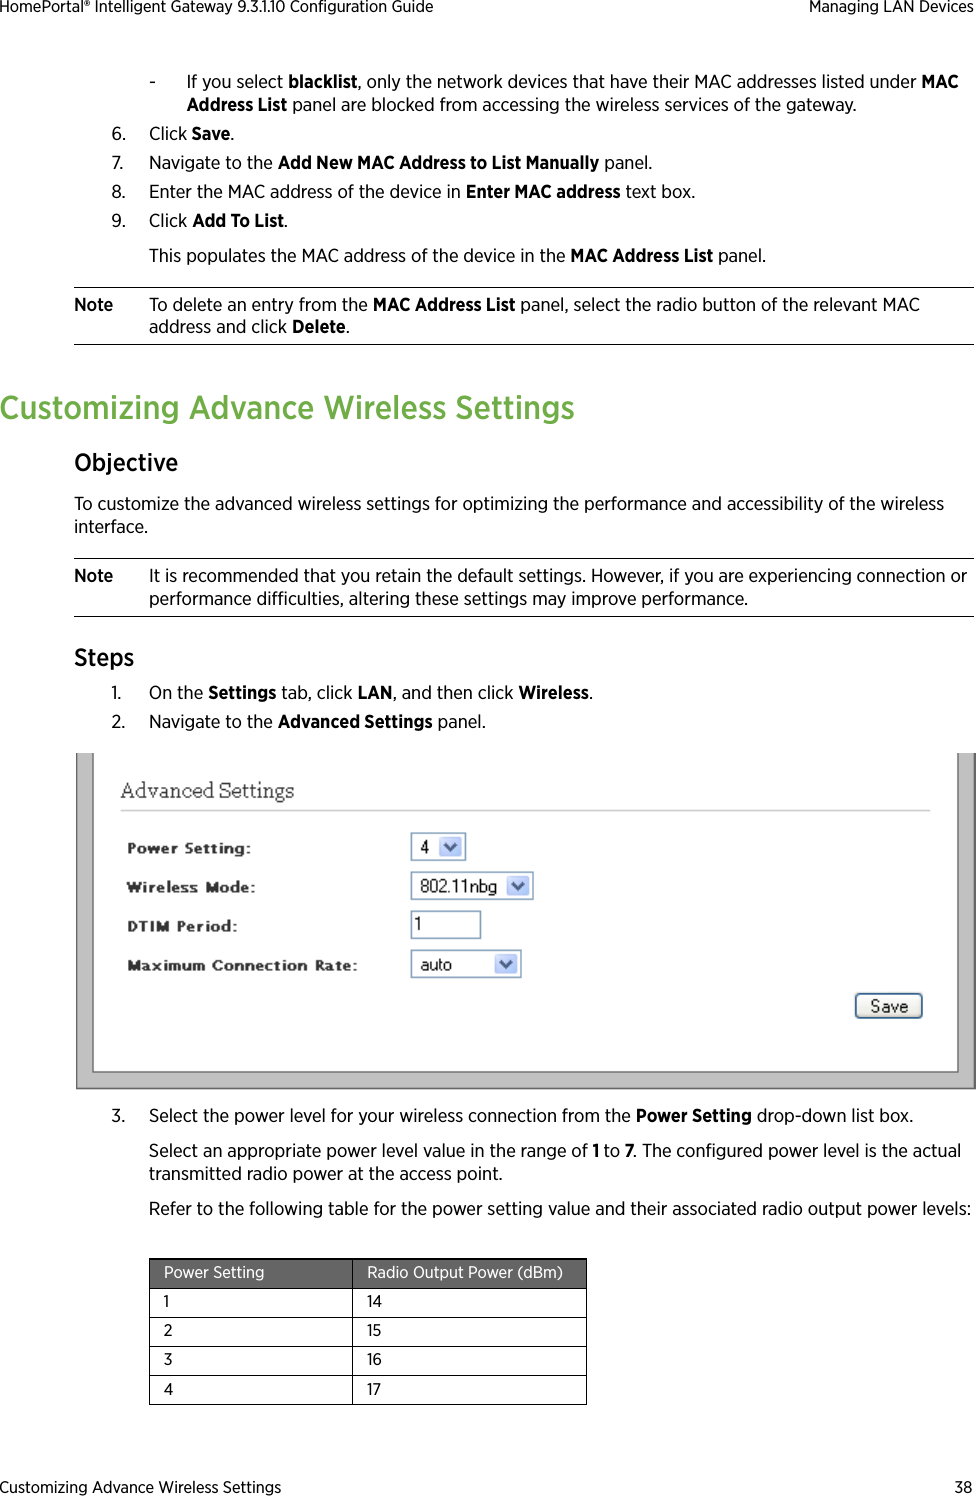 Customizing Advance Wireless Settings 38HomePortal® Intelligent Gateway 9.3.1.10 Configuration Guide Managing LAN Devices- If you select blacklist, only the network devices that have their MAC addresses listed under MAC Address List panel are blocked from accessing the wireless services of the gateway.6. Click Save.7. Navigate to the Add New MAC Address to List Manually panel.8. Enter the MAC address of the device in Enter MAC address text box.9. Click Add To List. This populates the MAC address of the device in the MAC Address List panel.Note To delete an entry from the MAC Address List panel, select the radio button of the relevant MAC address and click Delete.Customizing Advance Wireless SettingsObjectiveTo customize the advanced wireless settings for optimizing the performance and accessibility of the wireless interface.Note It is recommended that you retain the default settings. However, if you are experiencing connection or performance difficulties, altering these settings may improve performance.Steps1. On the Settings tab, click LAN, and then click Wireless.2. Navigate to the Advanced Settings panel.3. Select the power level for your wireless connection from the Power Setting drop-down list box. Select an appropriate power level value in the range of 1 to 7. The configured power level is the actual transmitted radio power at the access point.Refer to the following table for the power setting value and their associated radio output power levels:Power Setting Radio Output Power (dBm)1 14215316417